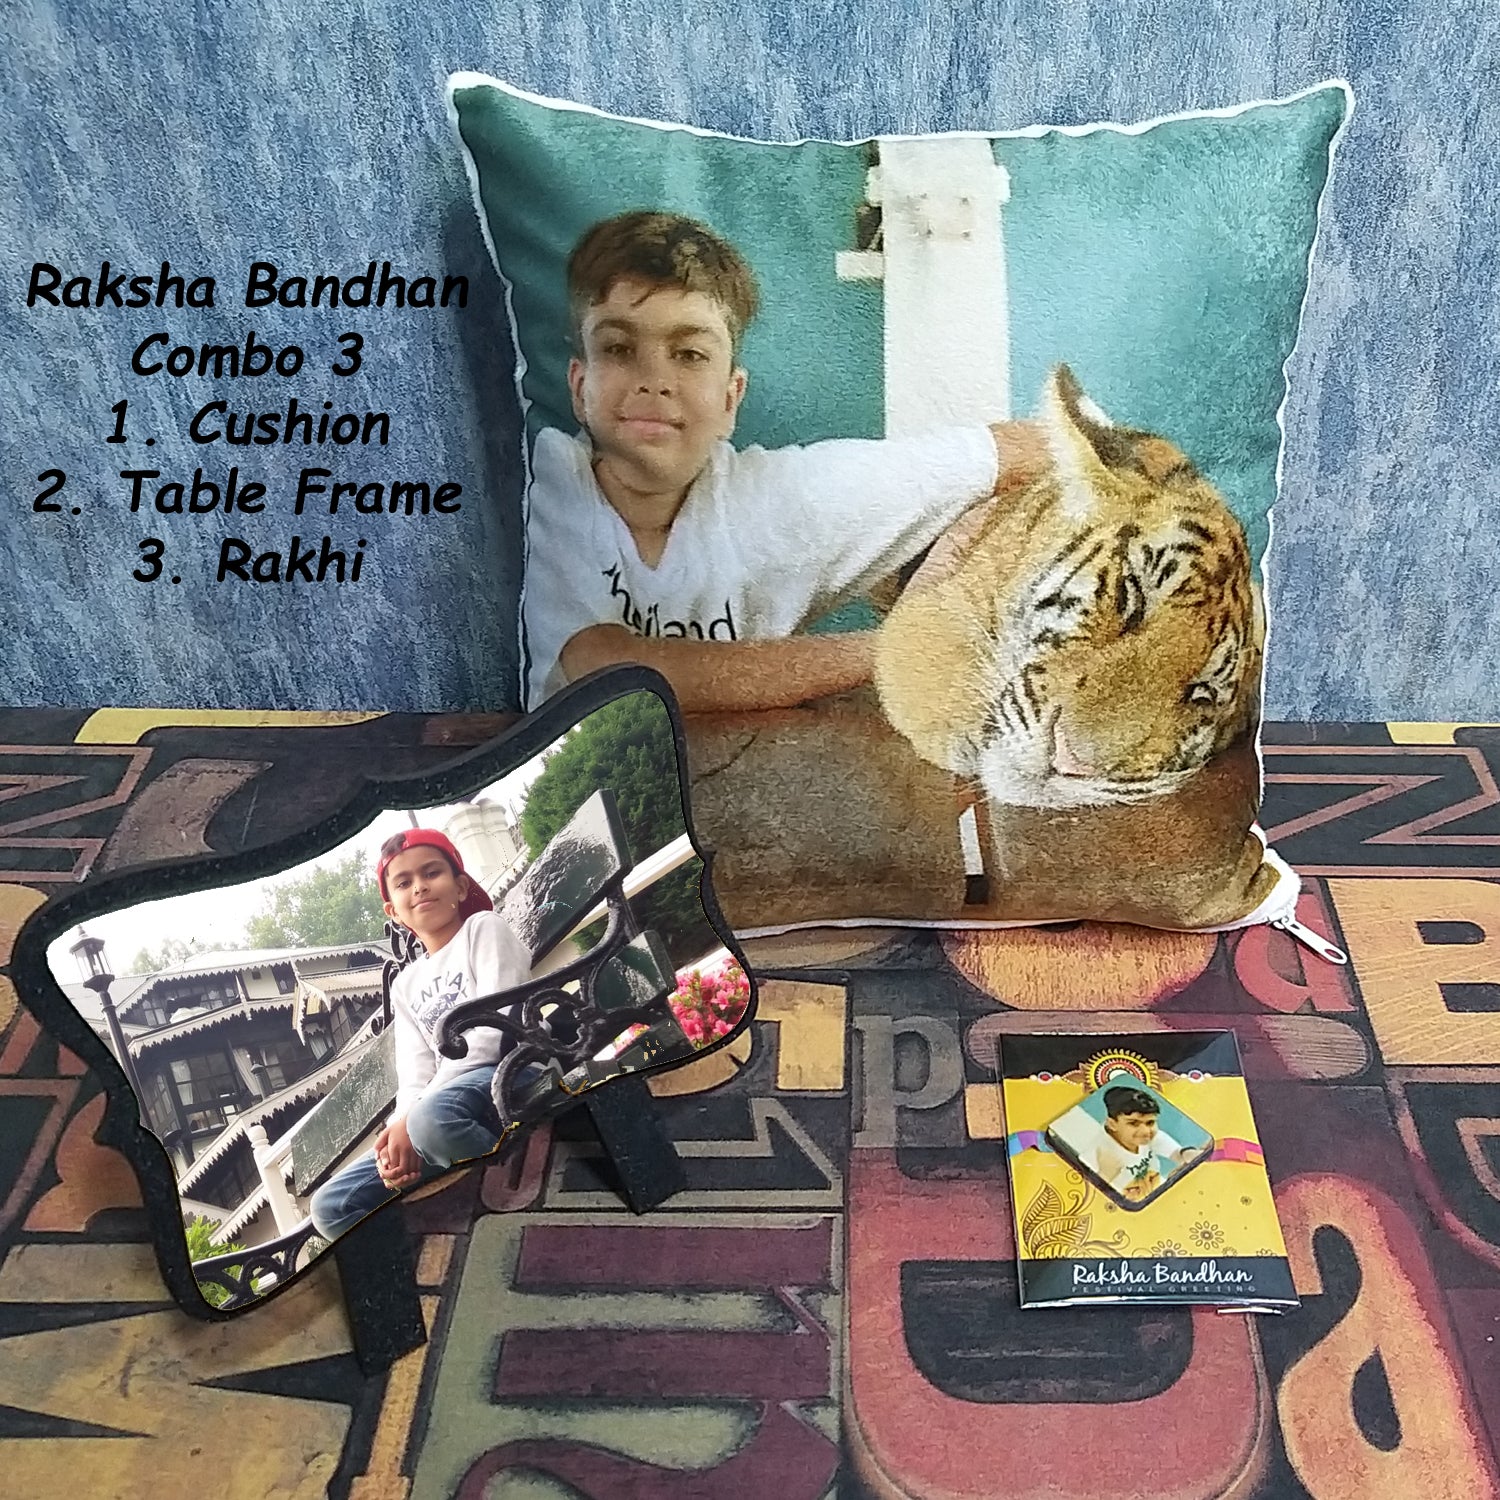 rakhi gifts for brother online